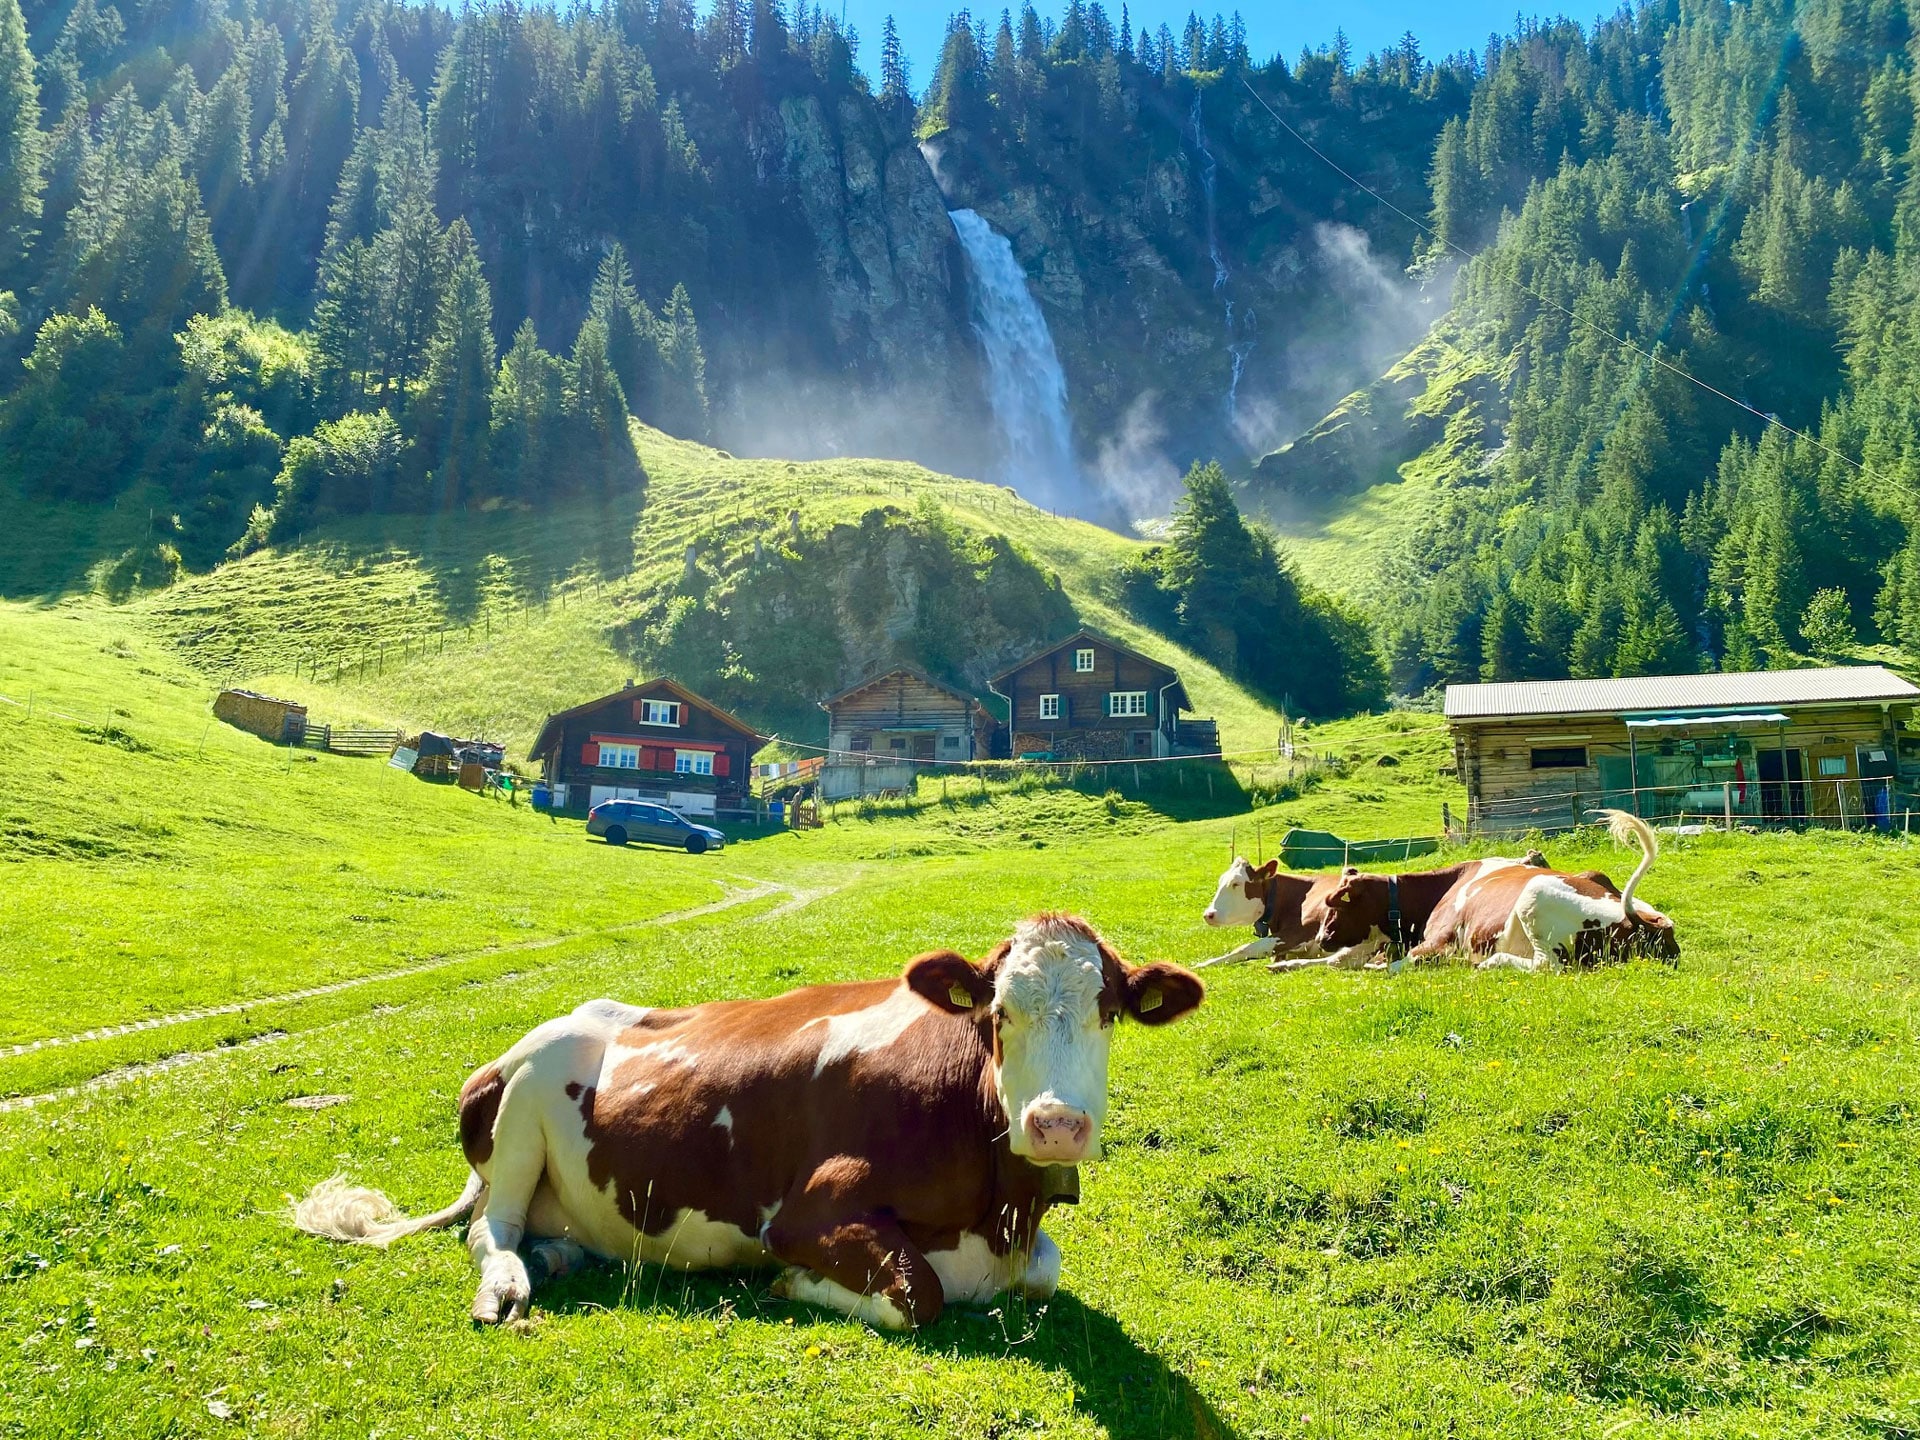 Grand Switzerland 5 Day Guided Private Tour (Lucerne)